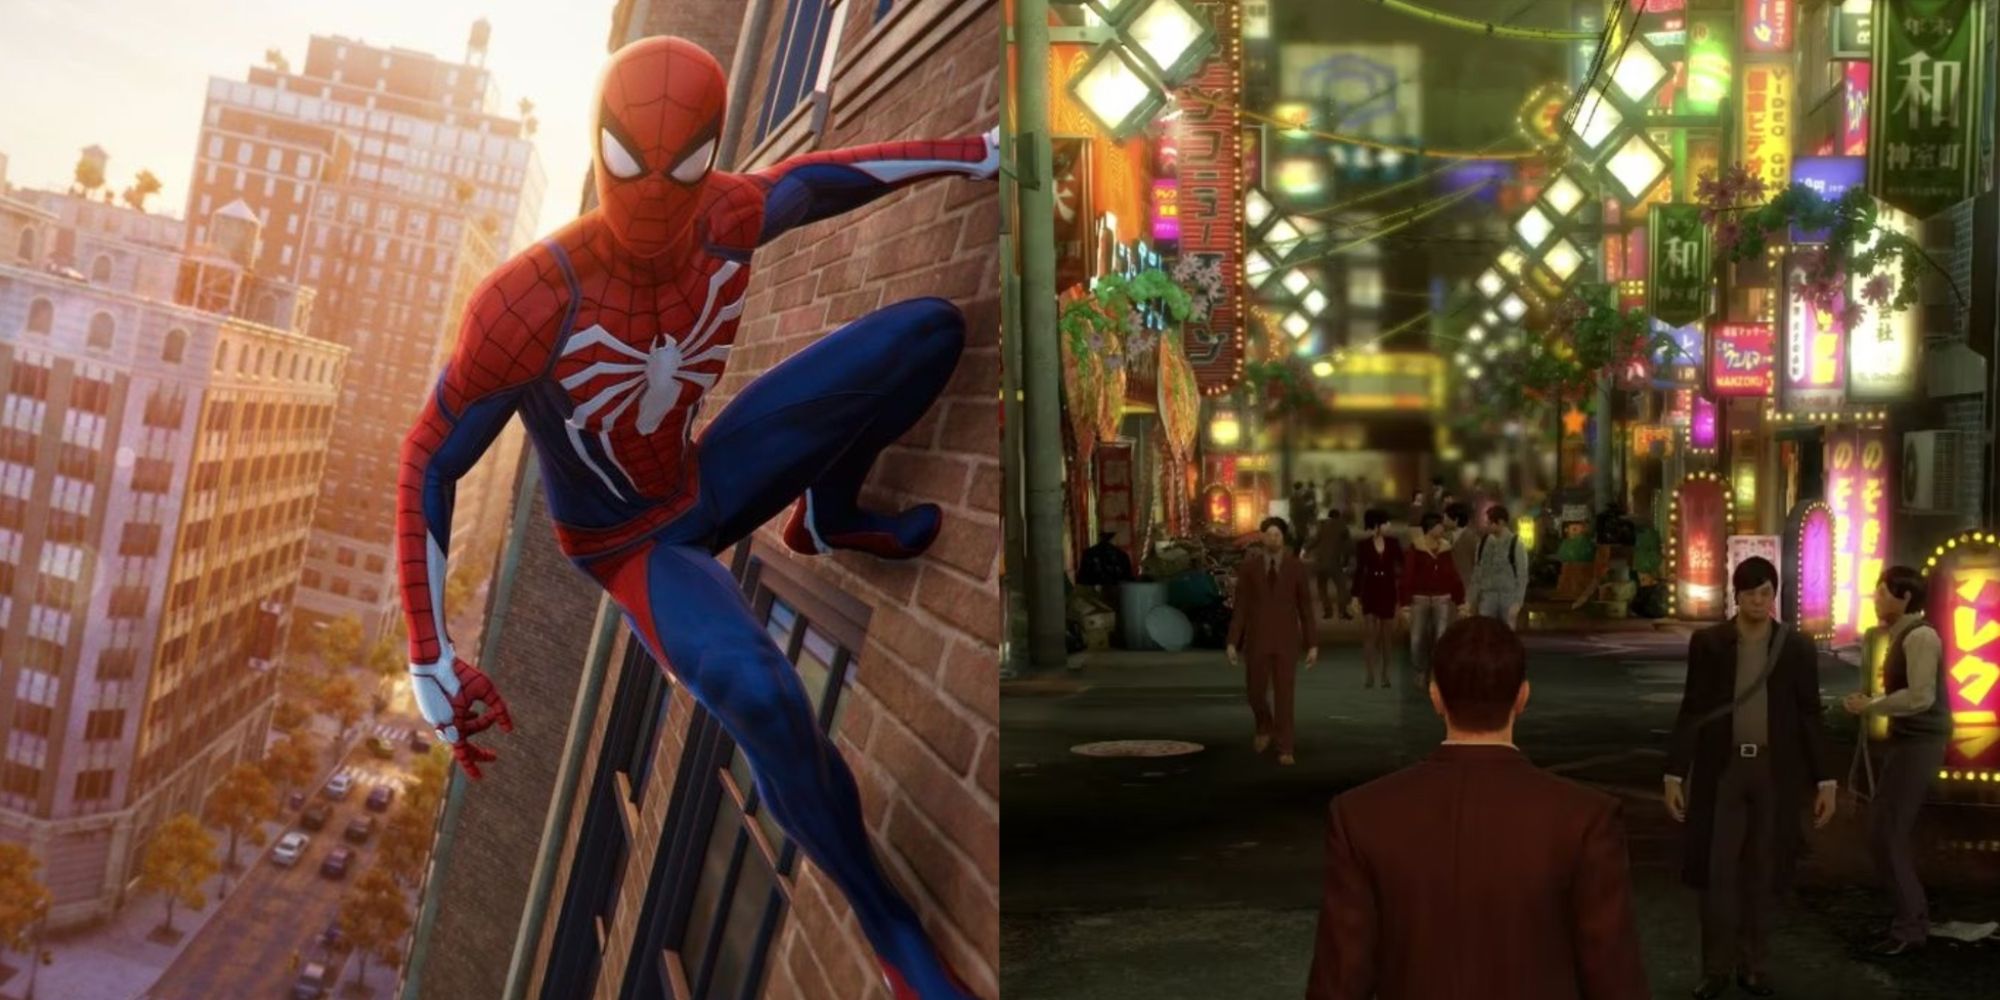 Best Open-World Games On PS4 Featured Split Image Spider-Man and Yakuza 0